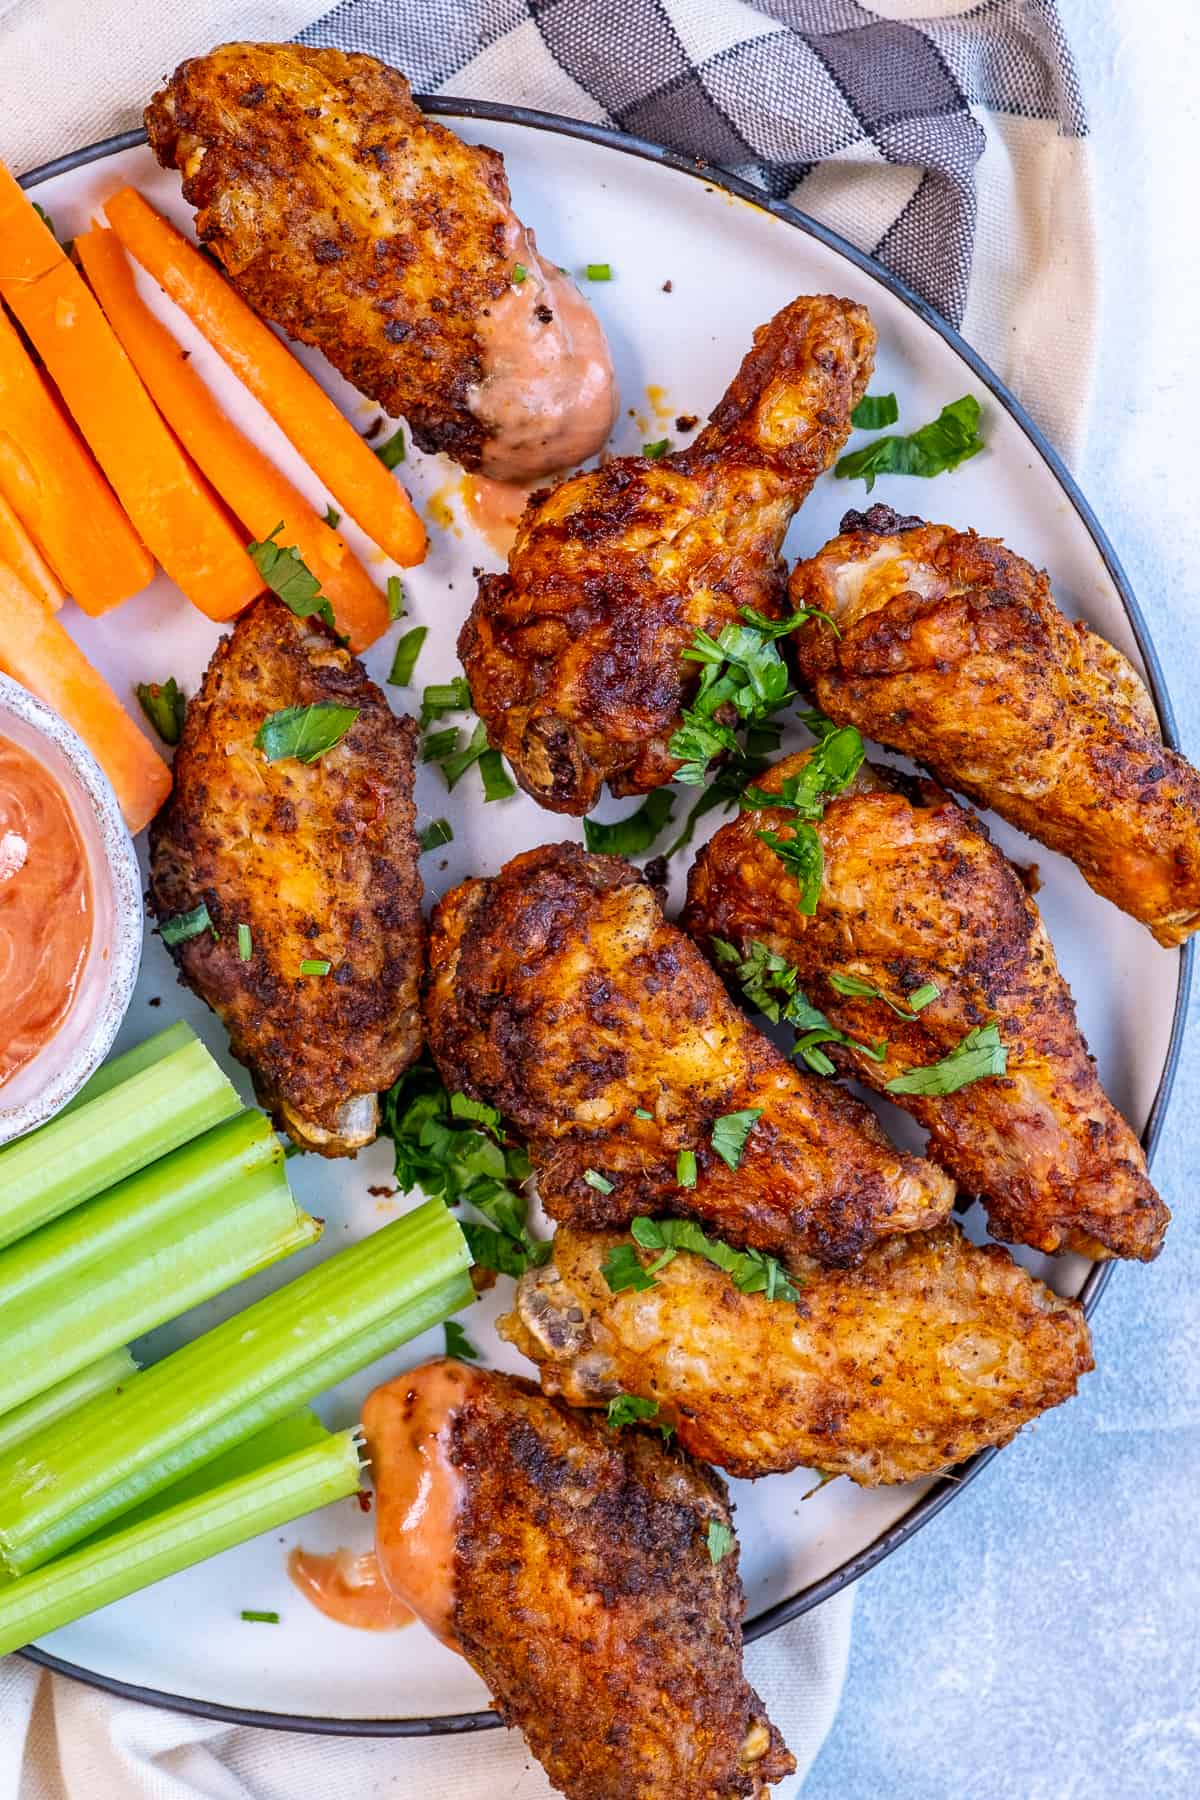 Chicken wings, celery sticks, carrot sticks and a red dipping sauce on a white plate.